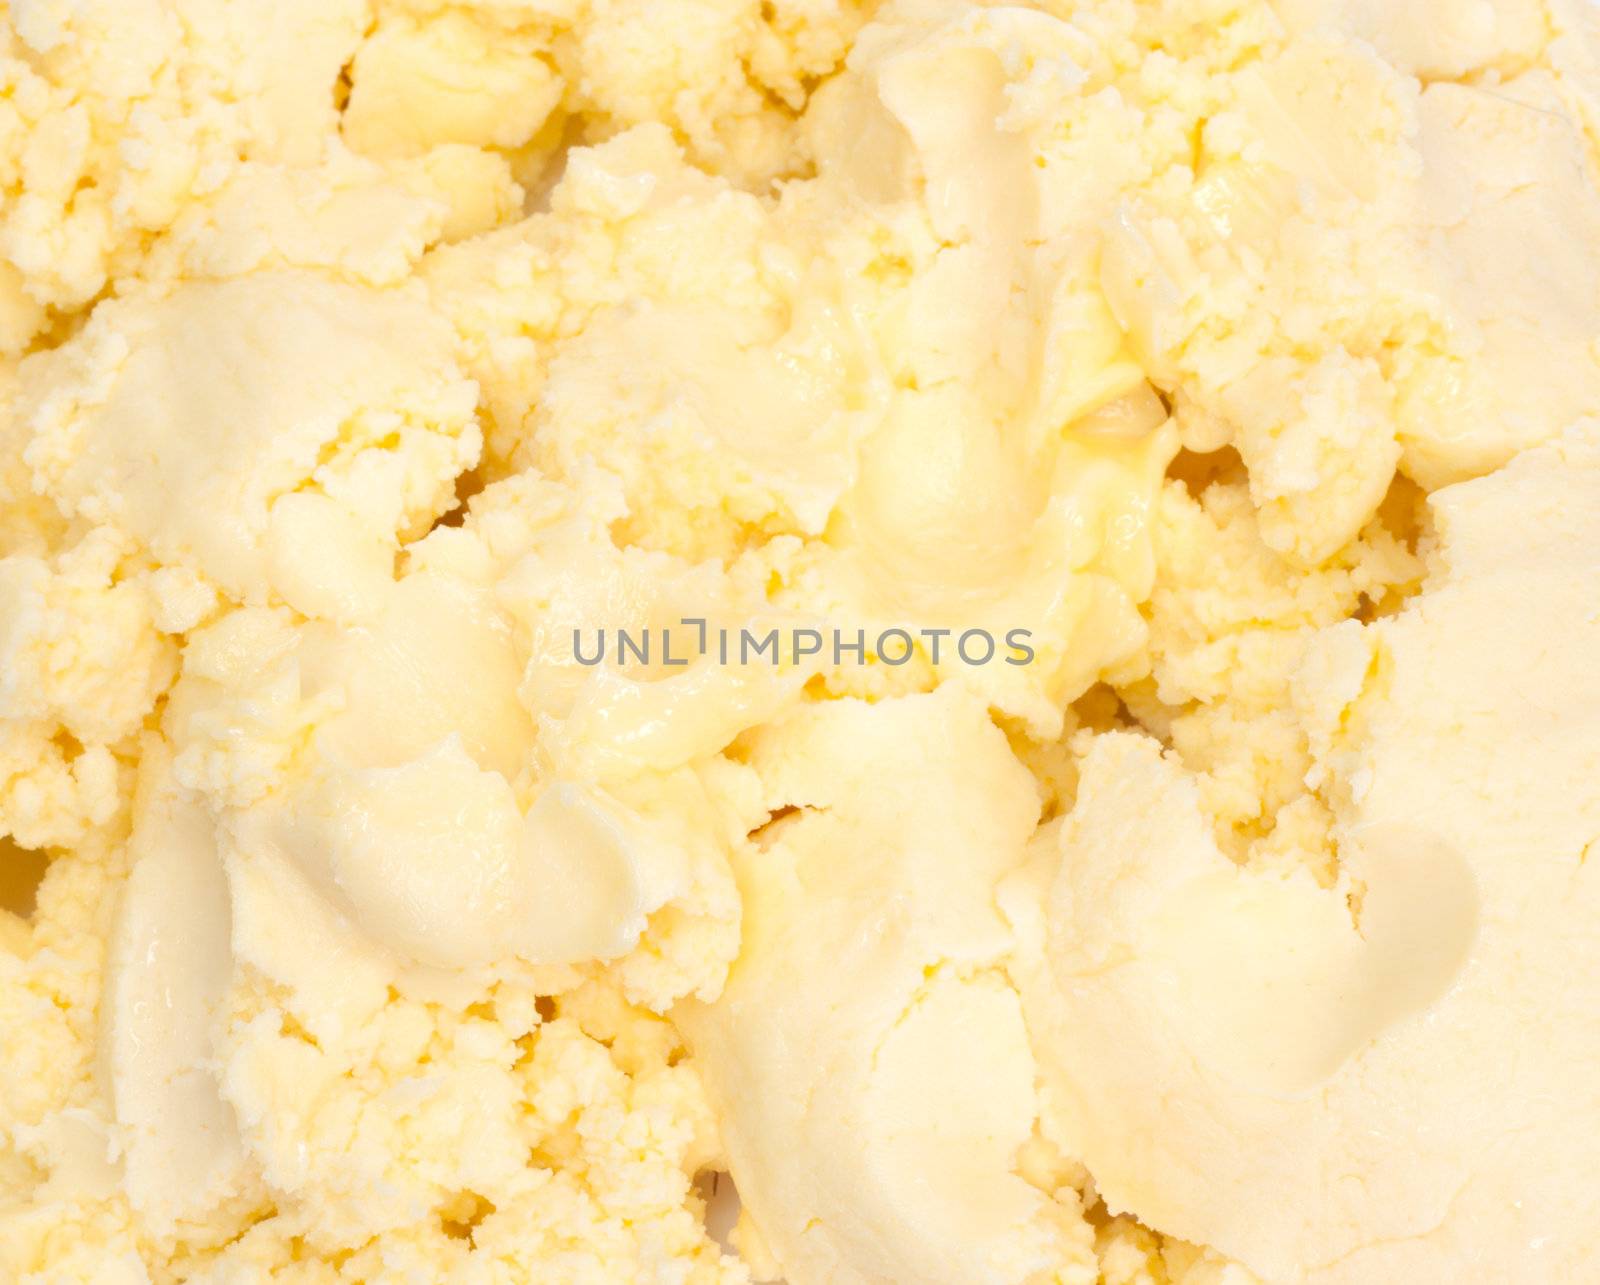 cream butter as background